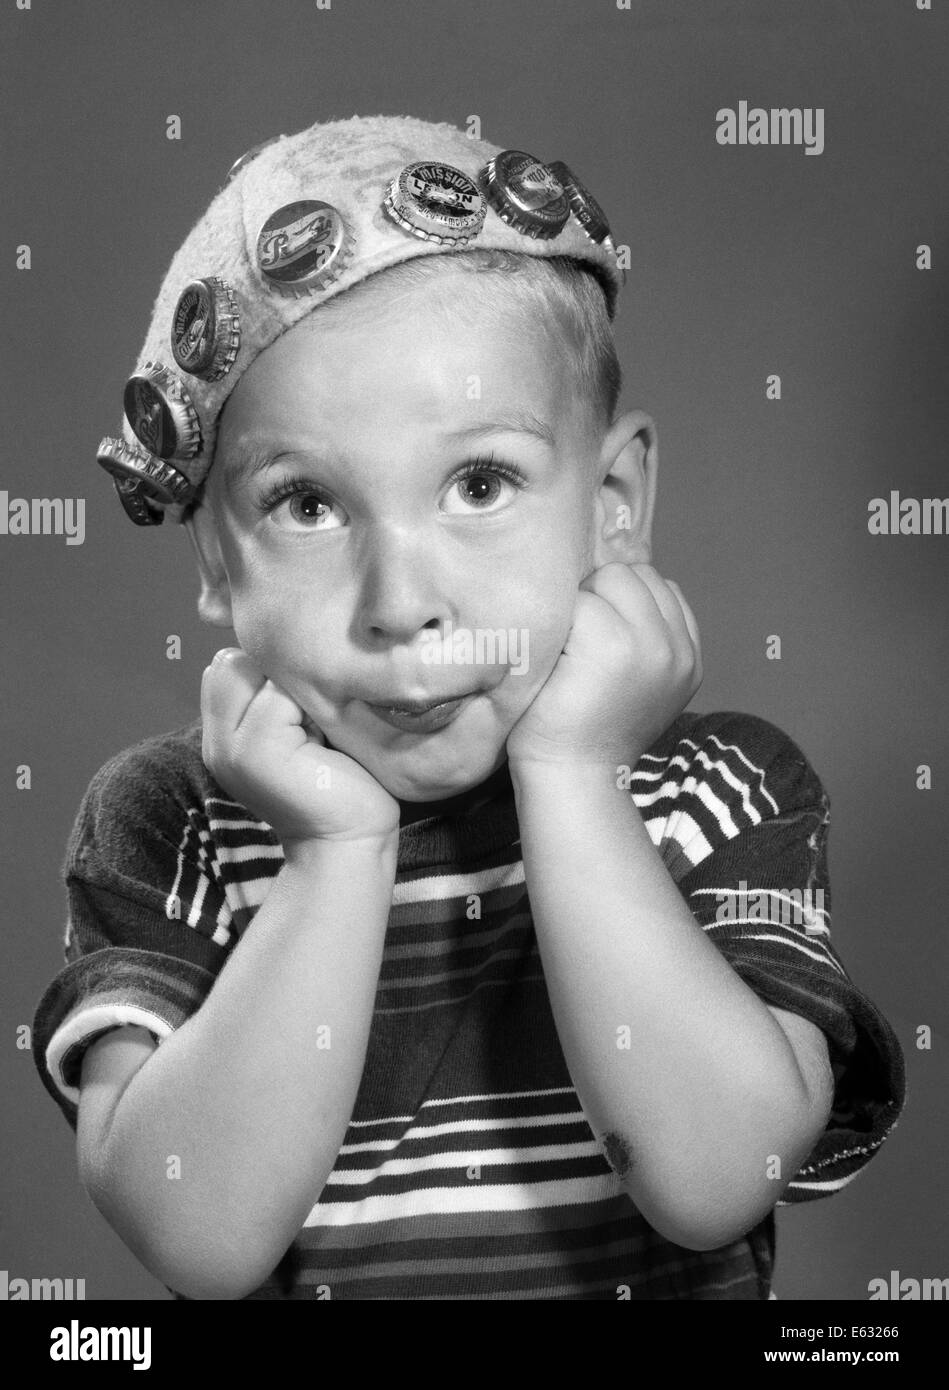 1950s PORTRAIT OF BOY RESTING HEAD ON FISTS LOOKING AT CAMERA WEARING BEANIE HAT DECORATED WITH SODA BOTTLE CAPS Stock Photo